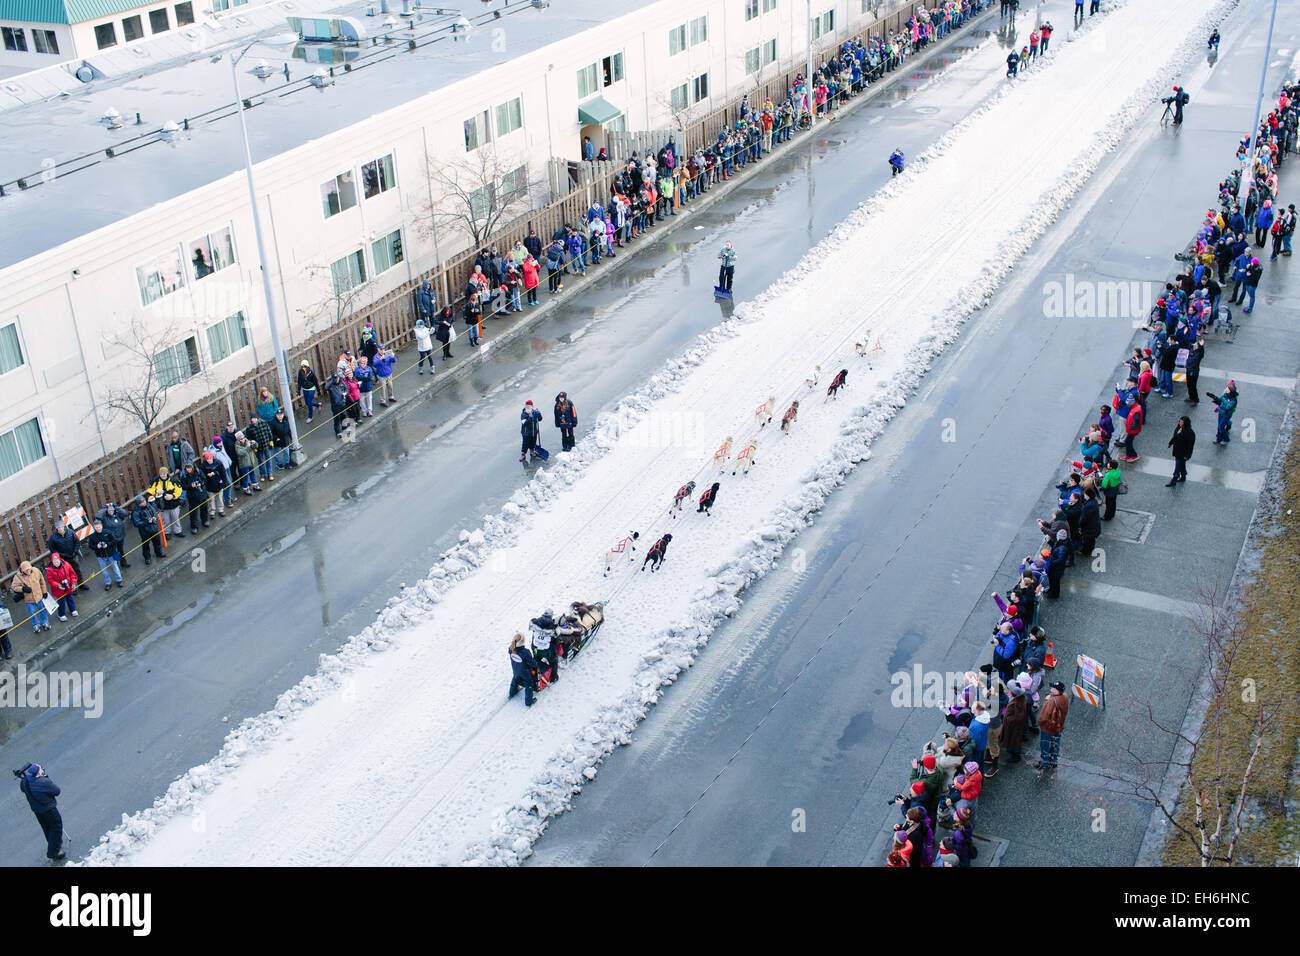 Scott Janssen, known as the «Mushin' Mortician,» waves to the crowd as he mushes down Fourth Avenue in Anchorage Alaska at the Iditarod's Ceremonial Start on March 7, 2015. The race will resume with the official start in Fairbanks on March 9. Photo: Joshua Corbett/dpa (zu dpa: Alaska, Land des Hechelns: «Das härteste Schlittenrennen der Welt» vom 08.03.2015) Stock Photo